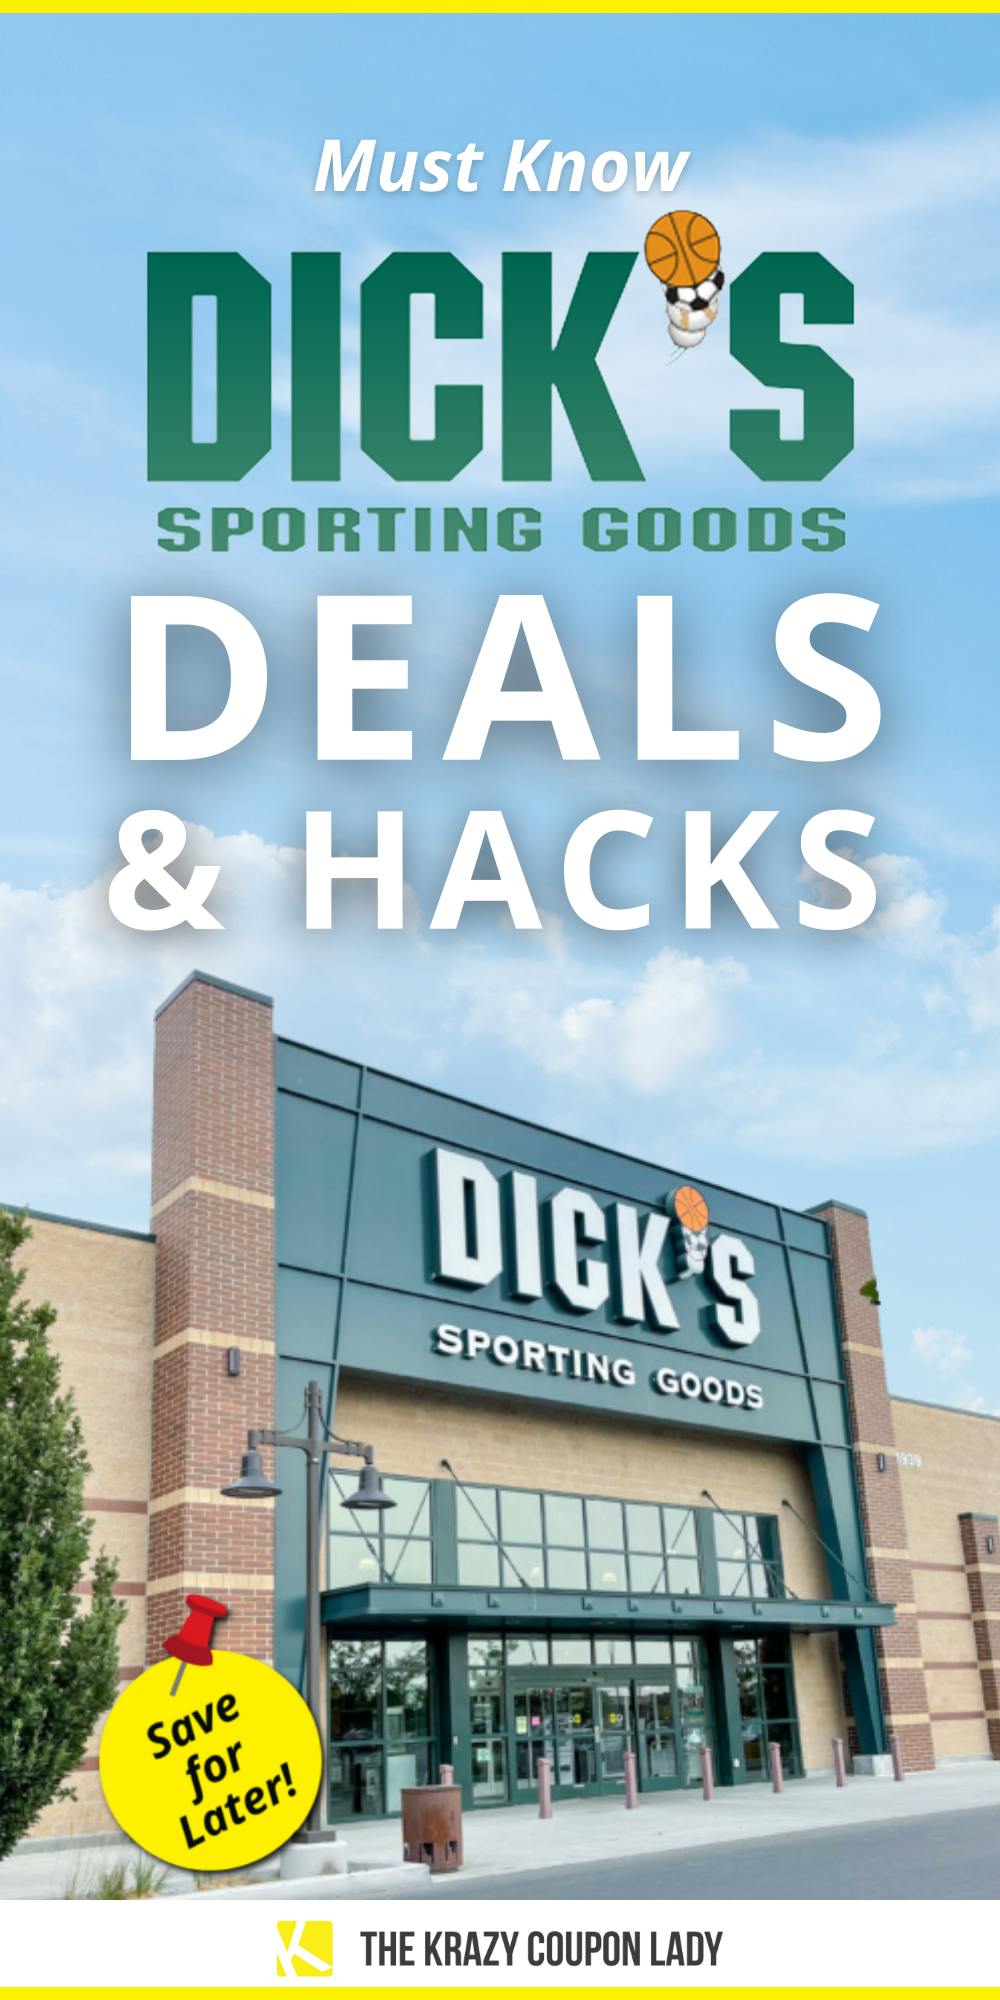 Every Way Imaginable to Score Deals at Dick's Sporting Goods